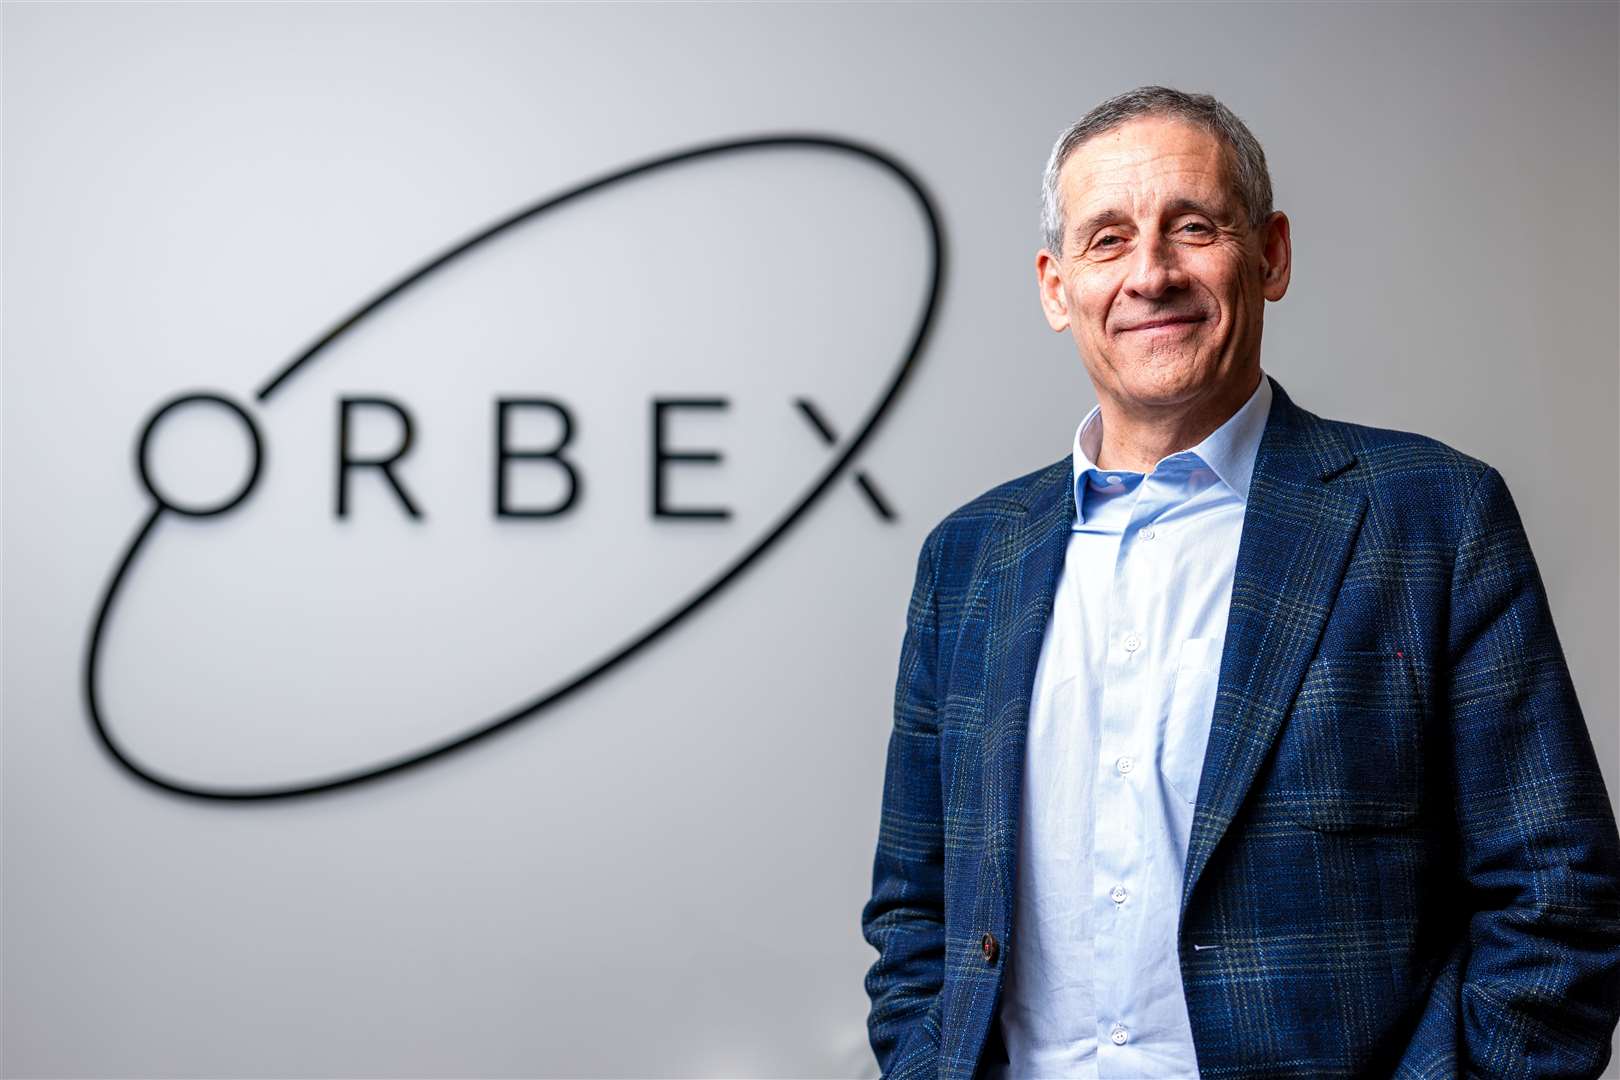 Miguel Belló Mora, who has been announced as the new executive chair of Orbex. Picture: Abermedia